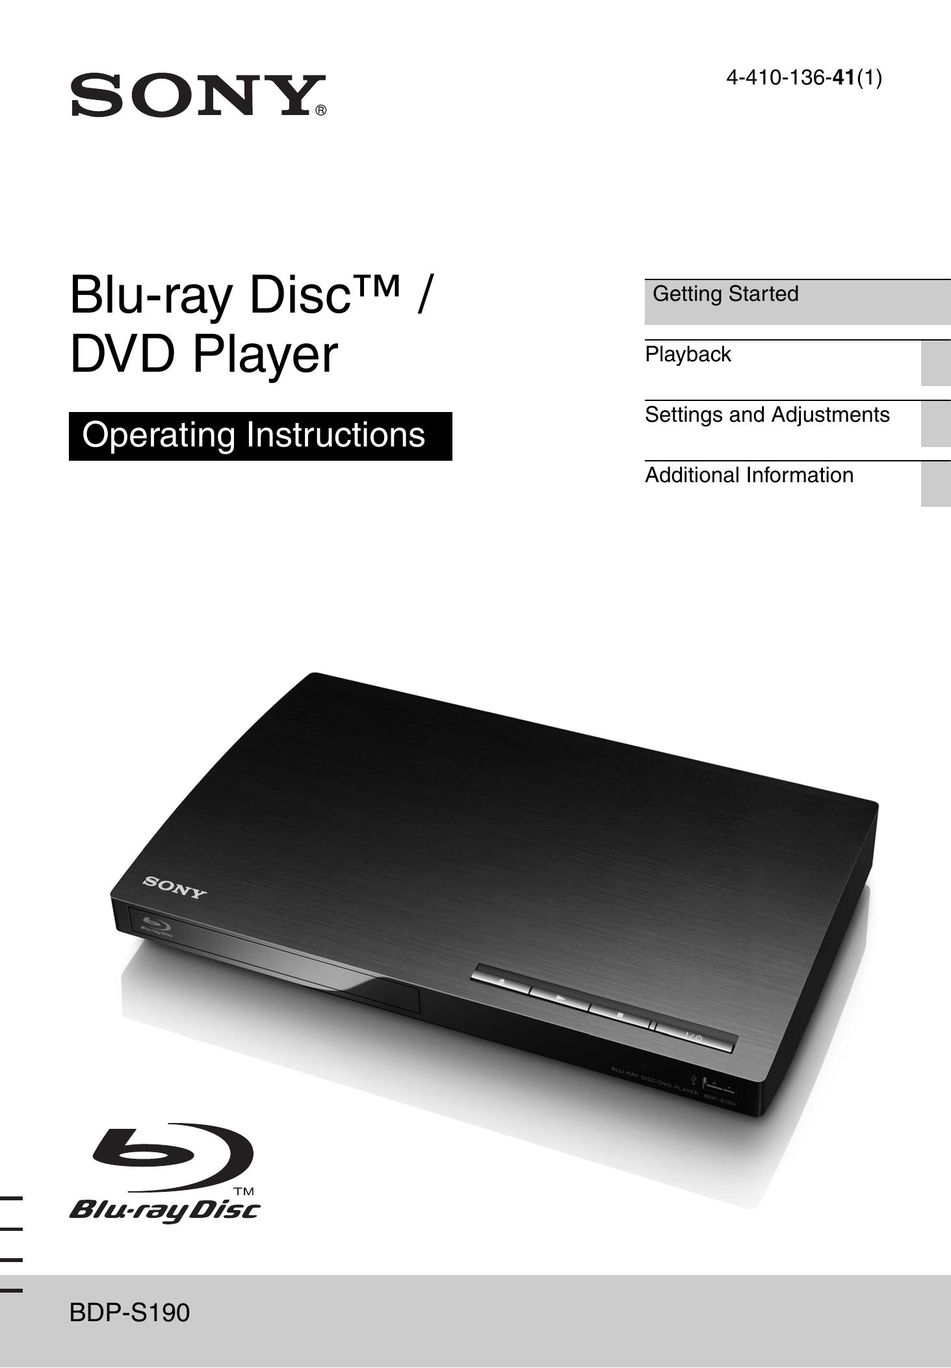 Sony BDP-S190 Blu-ray Player User Manual